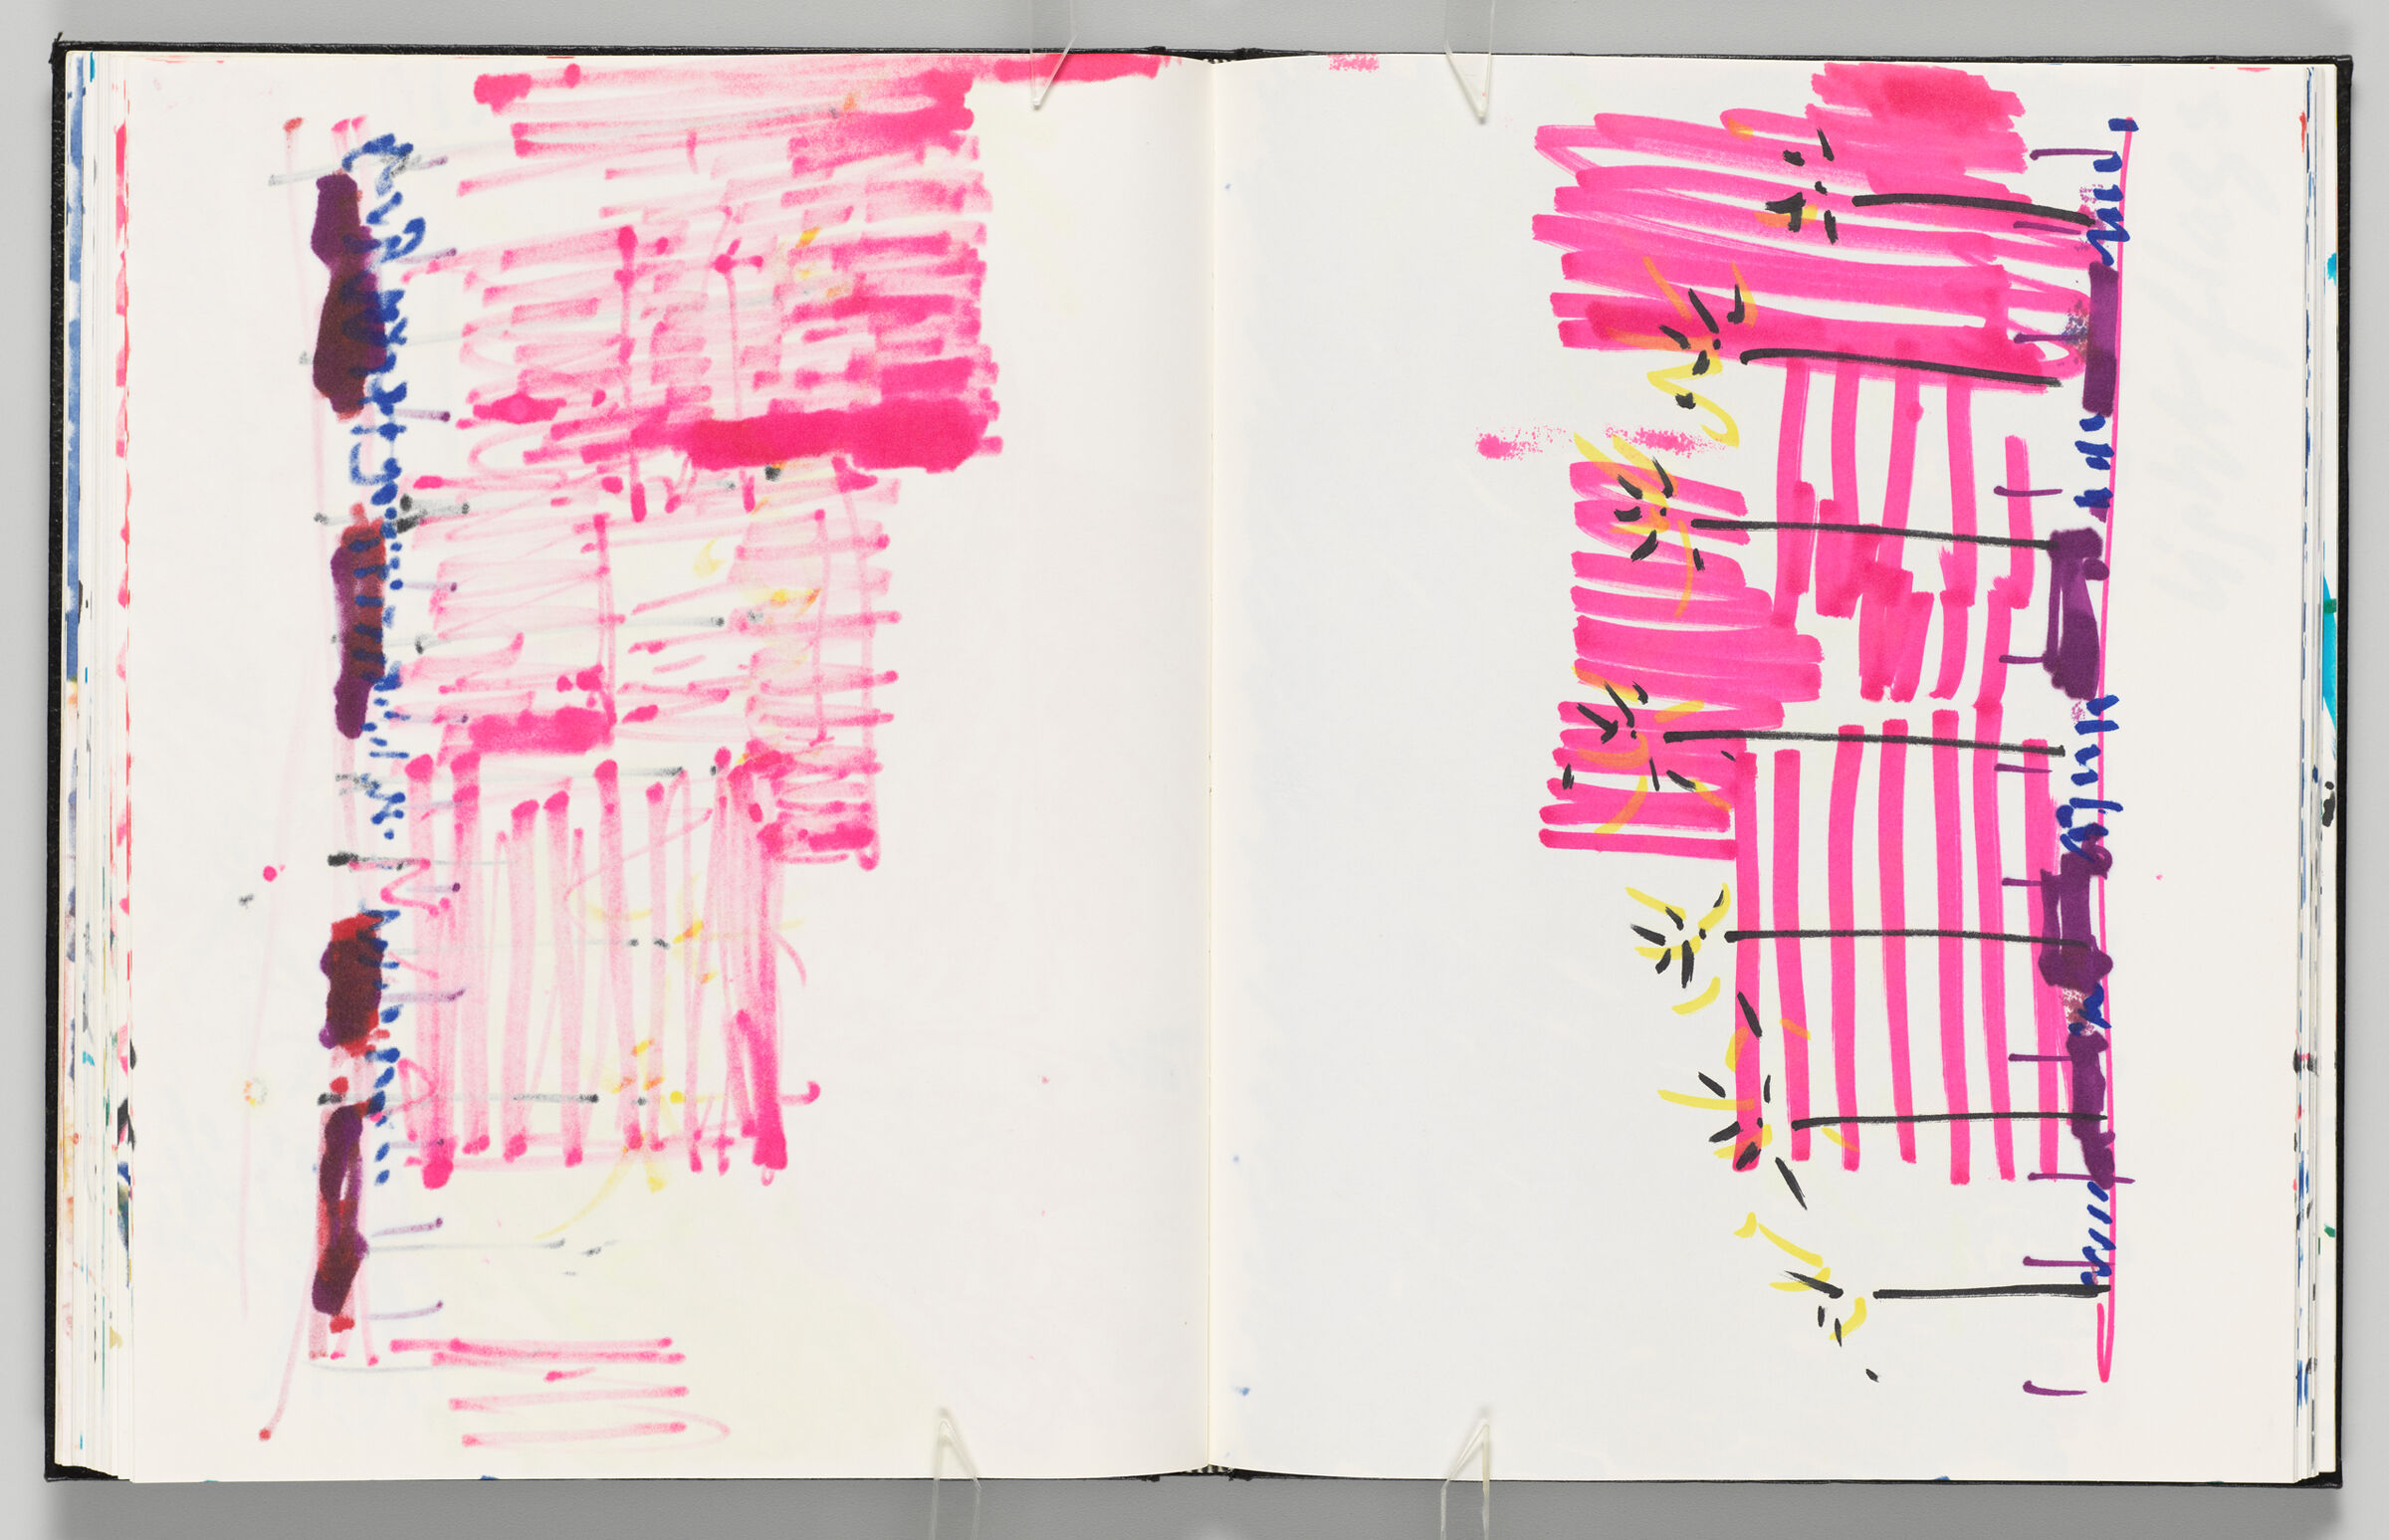 Untitled (Bleed-Through Of Previous Page, Left Page); Untitled (Light Work Design With Figures, Right Page)